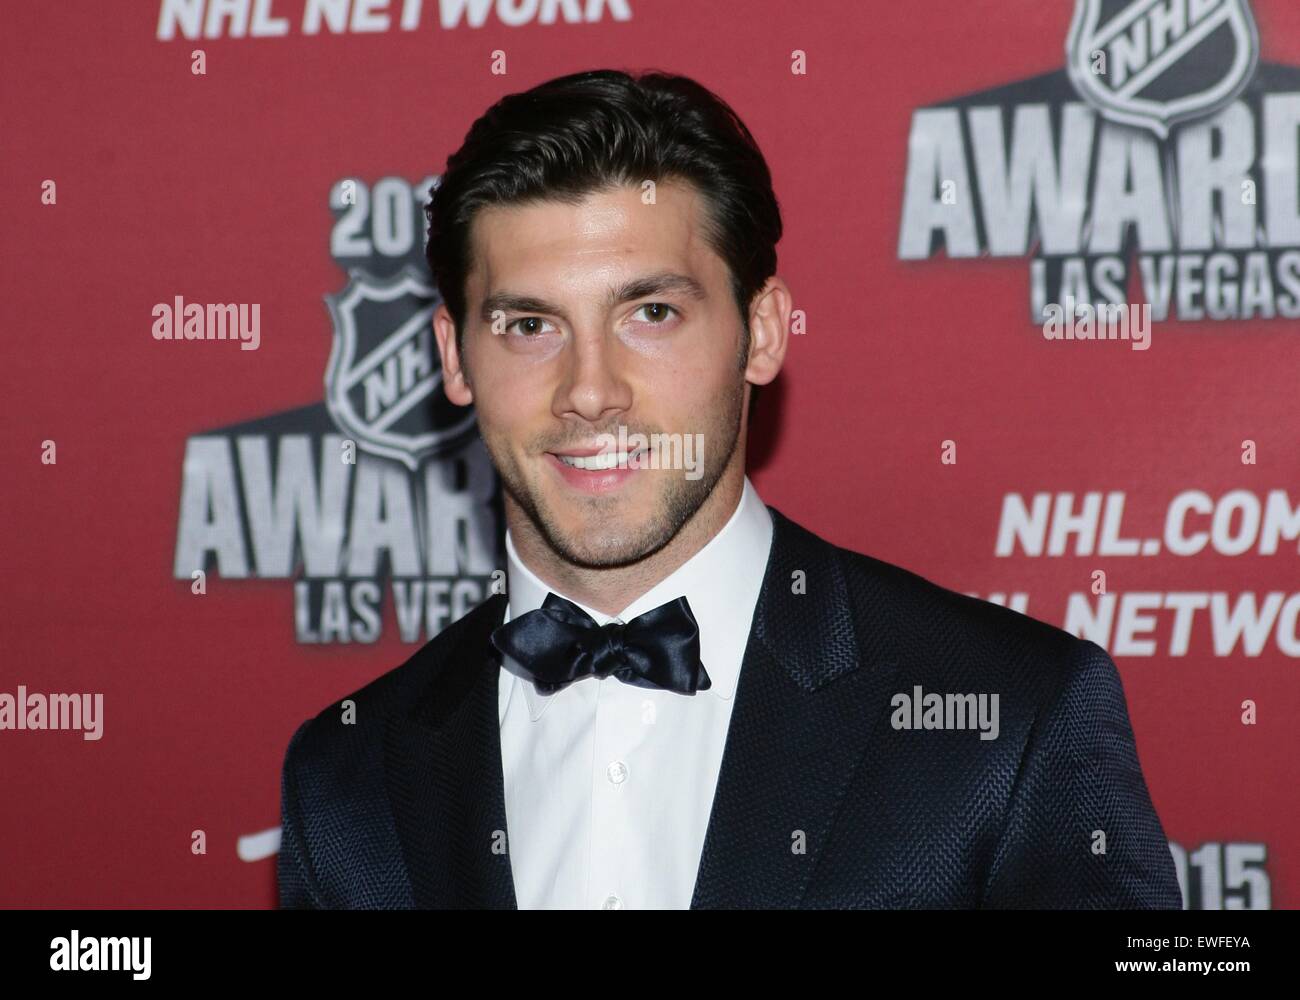 Kris letang hi-res stock photography and images - Alamy